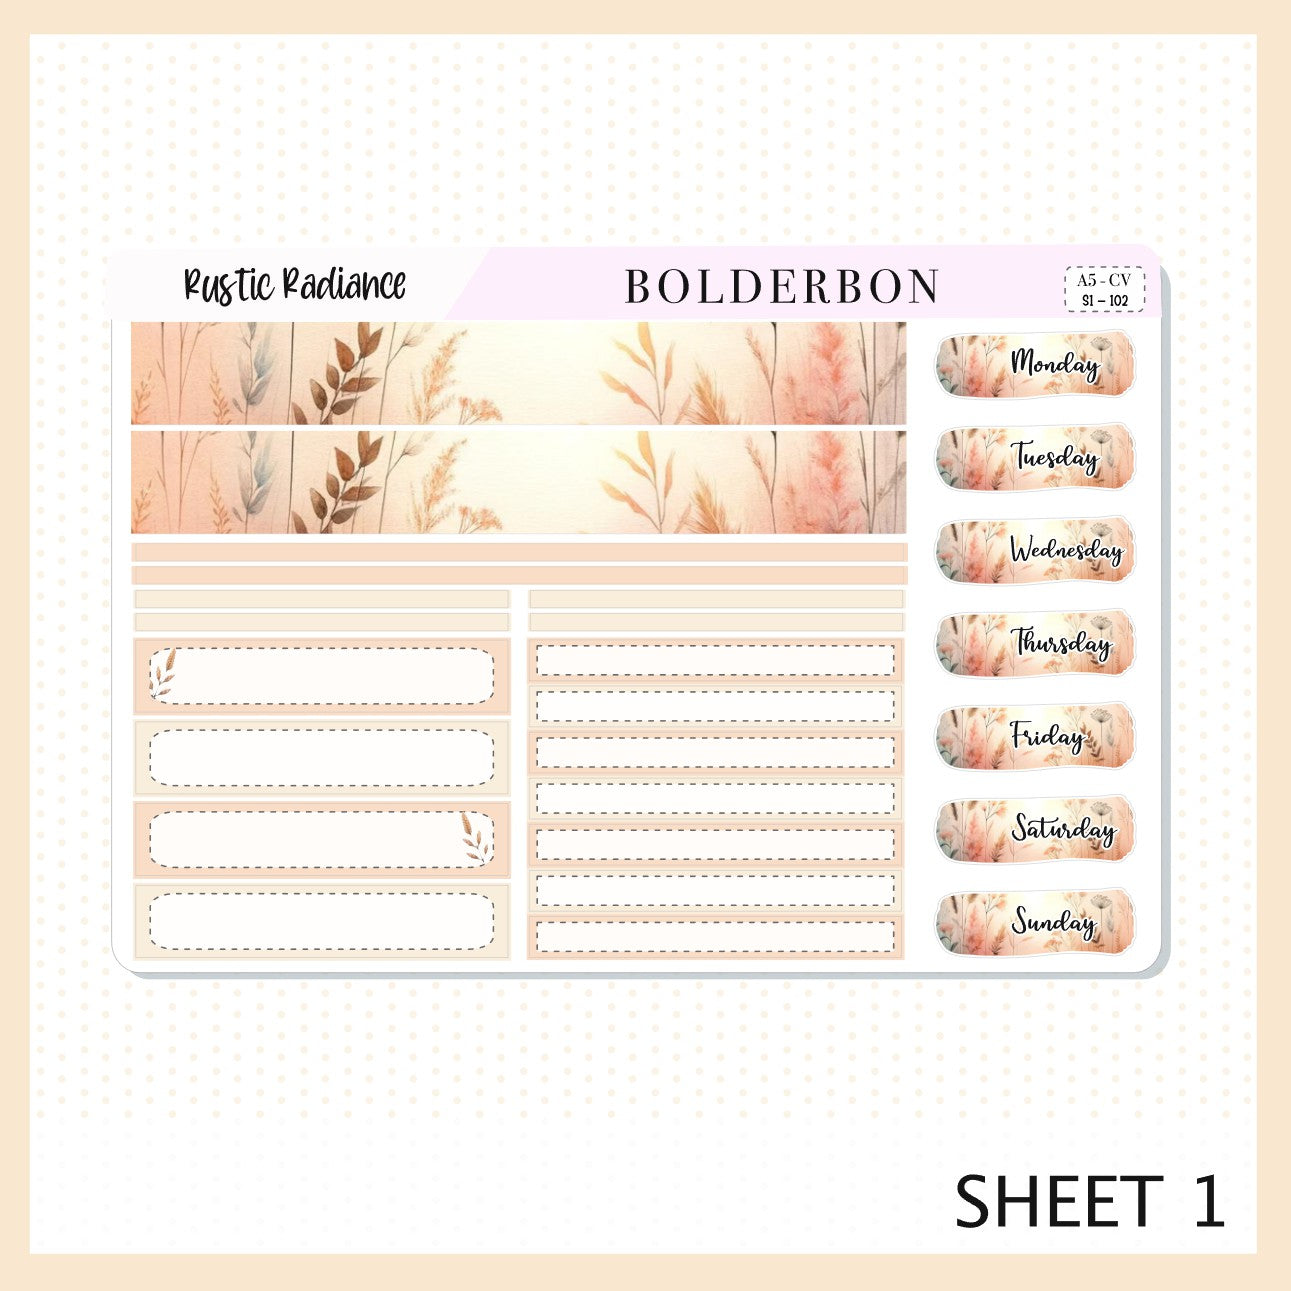 RUSTIC RADIANCE "Compact Vertical" || A5 Planner Sticker Kit